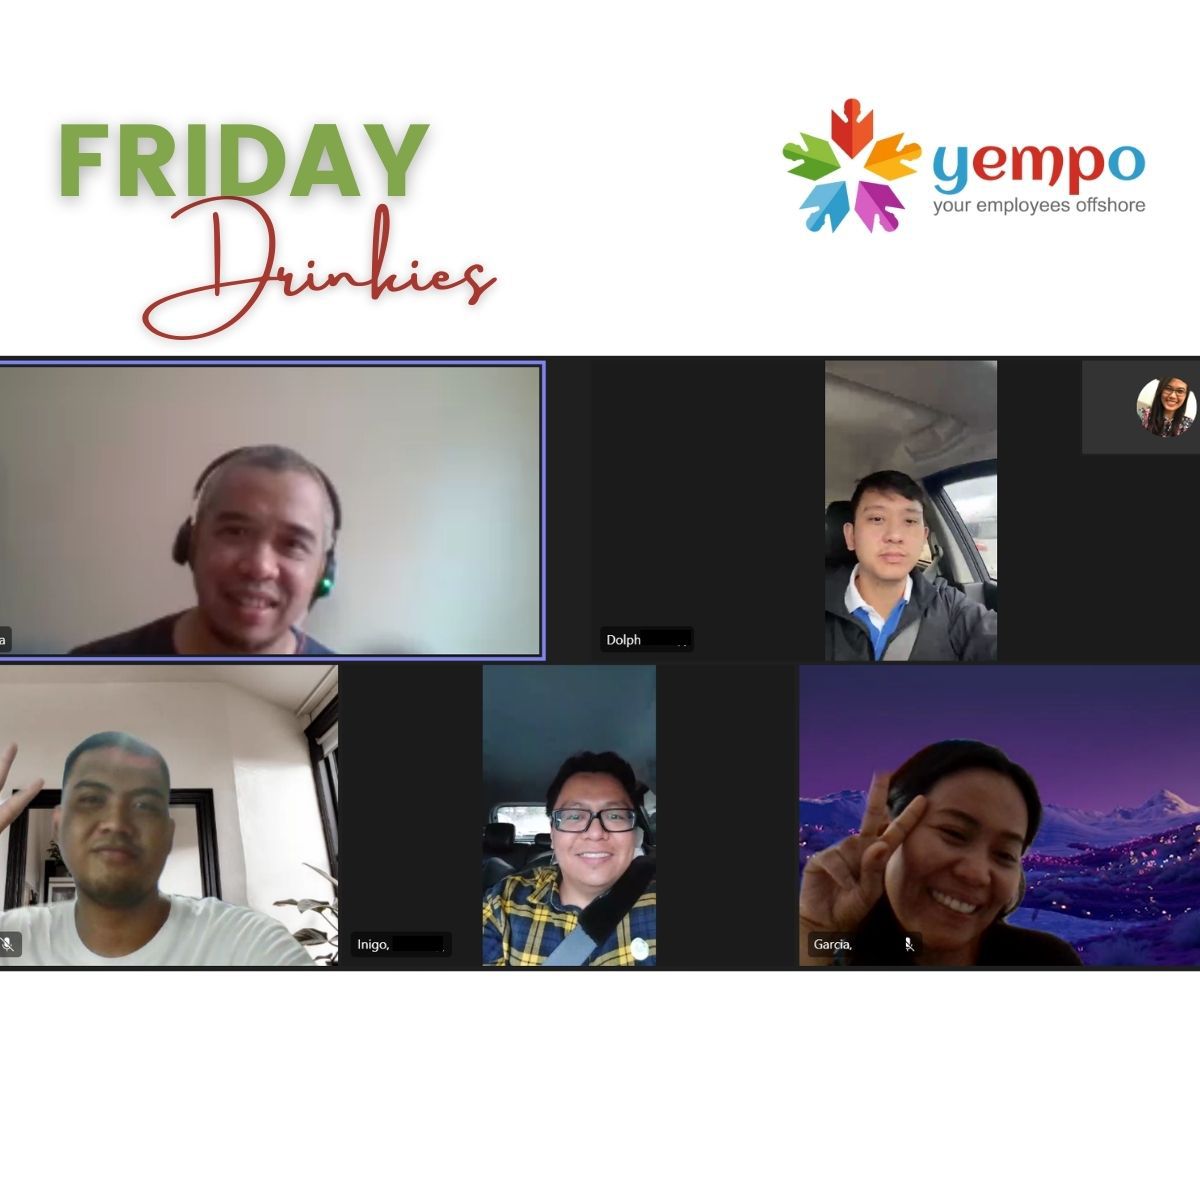 Work hard, play hard! Another virtual Friday Drinkies session with team Yempo to end another productive week and connect with our colleagues! #FridayDrinks #WorkAndPlay #FridayDrinks #WorkAndPlay